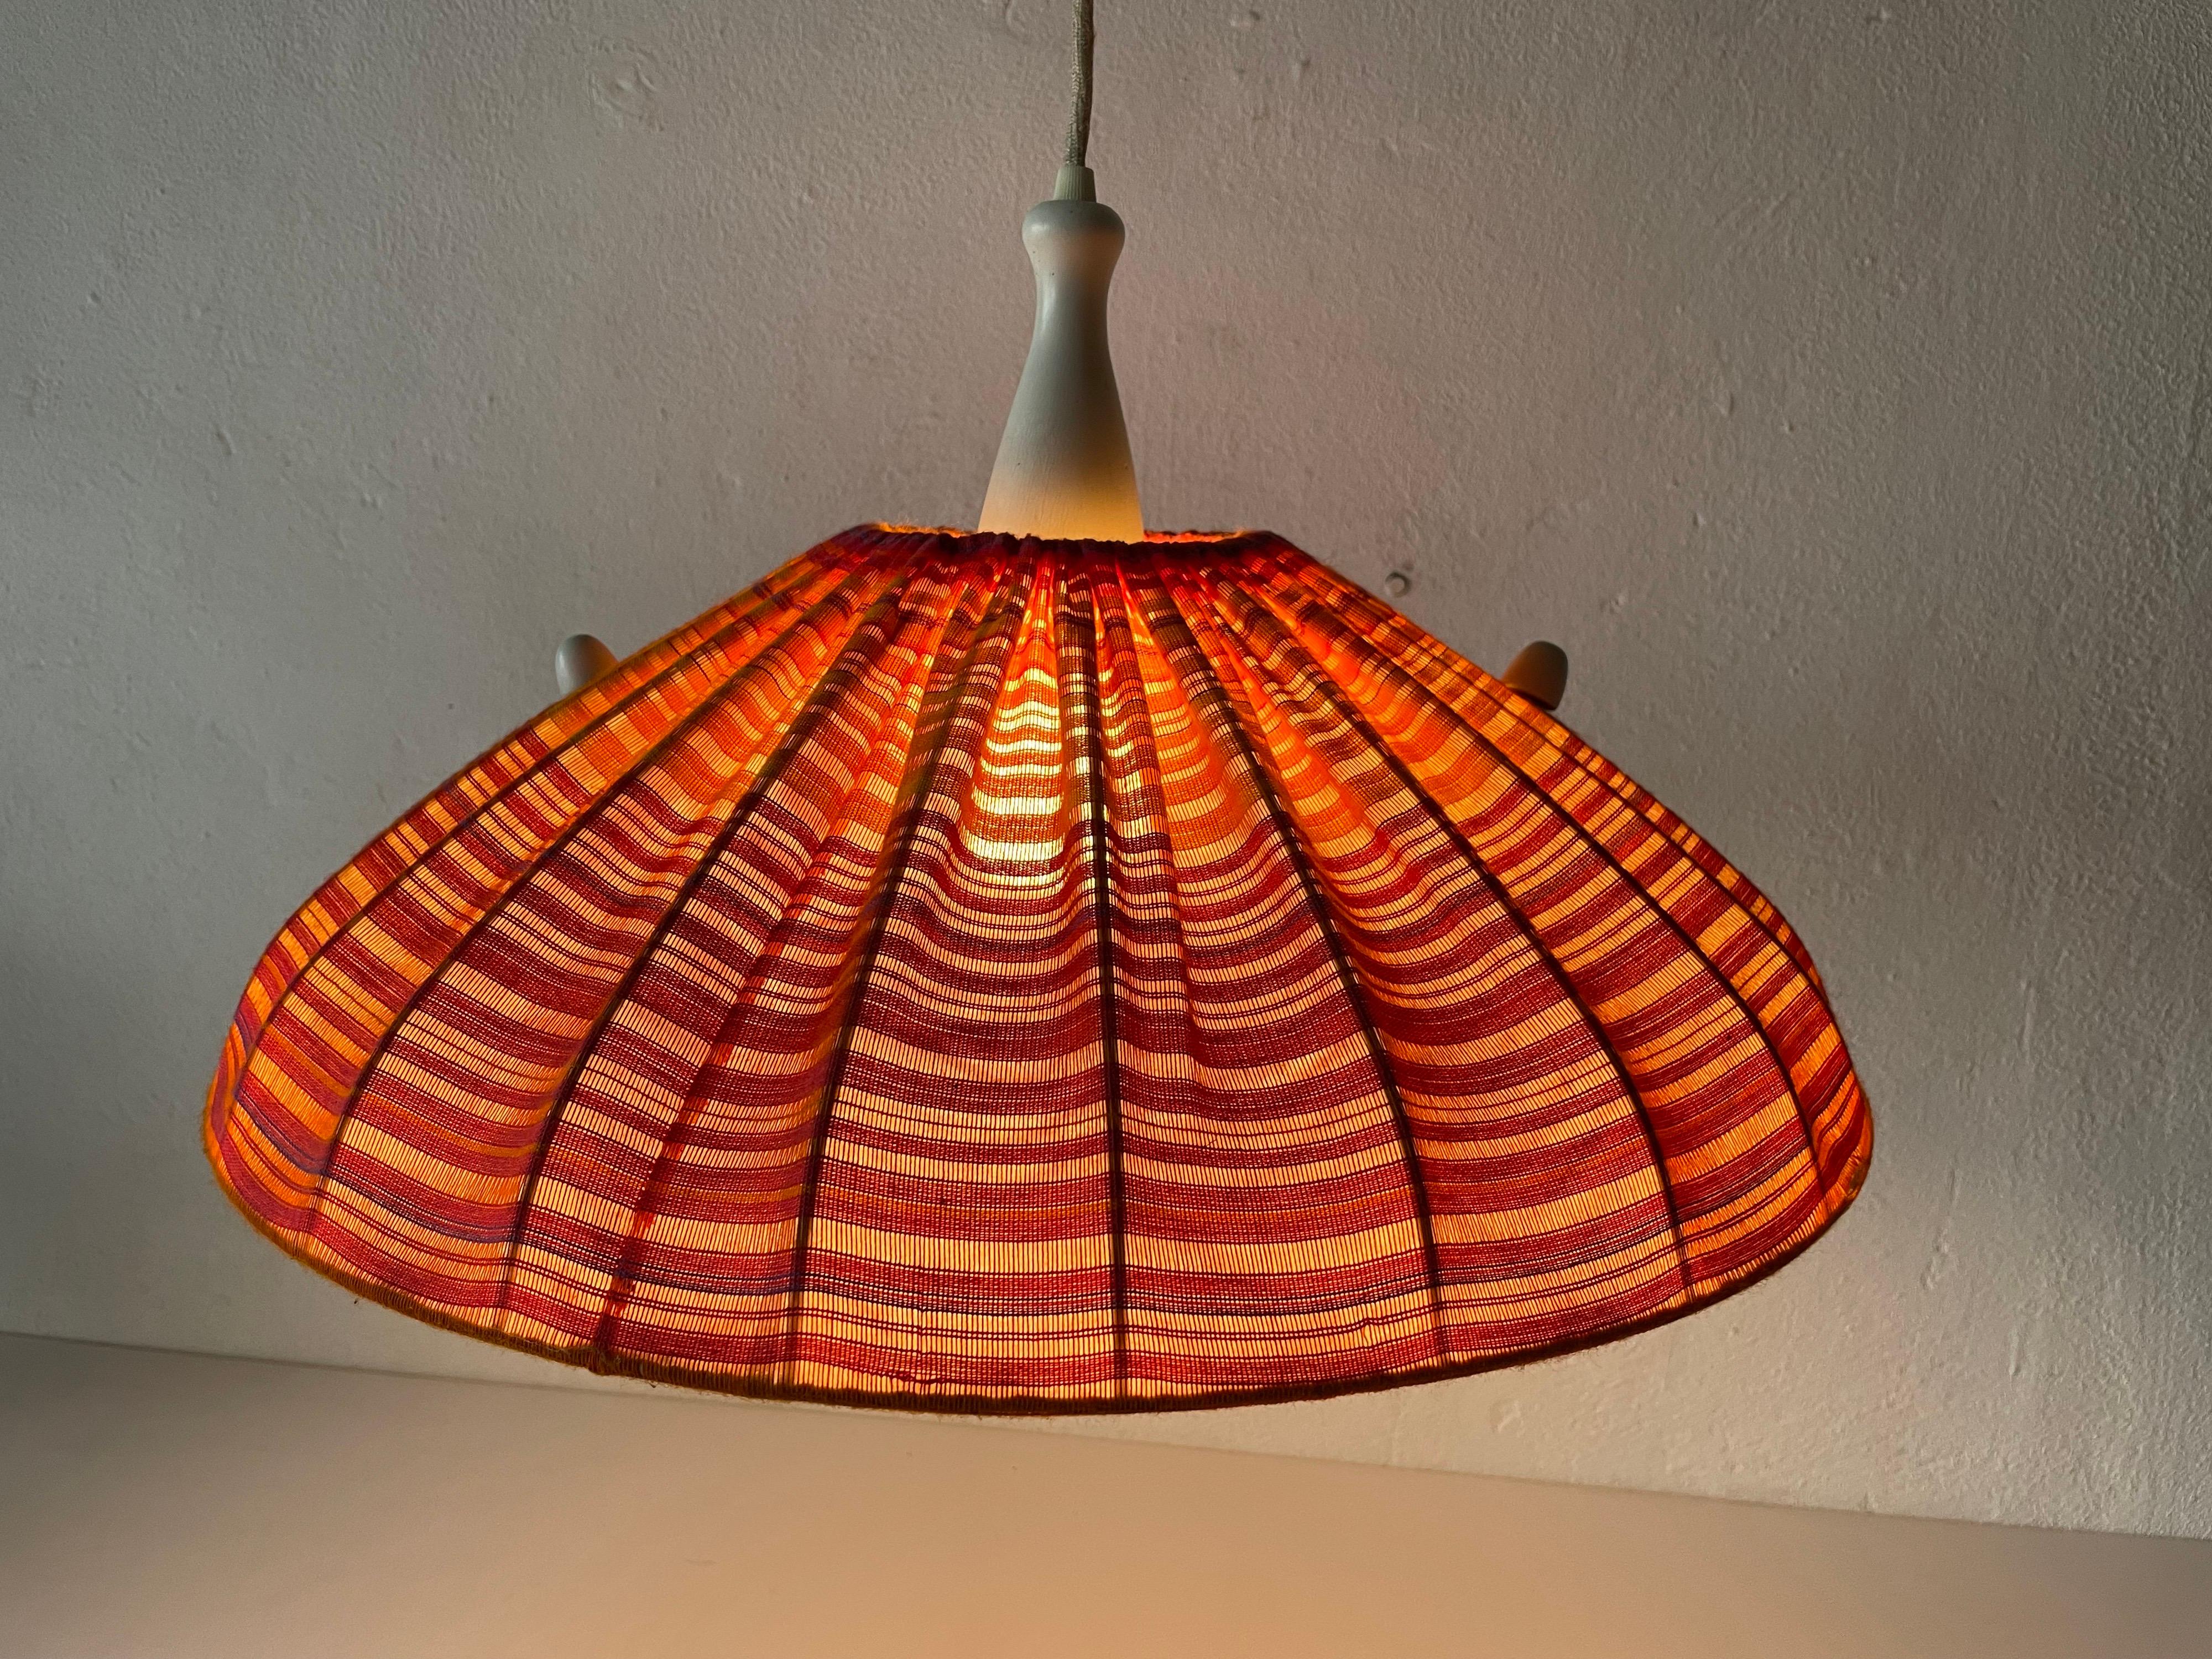 Fabric Shade & Wood Large Pendant Lamp by Temde, 1960s, Germany For Sale 4